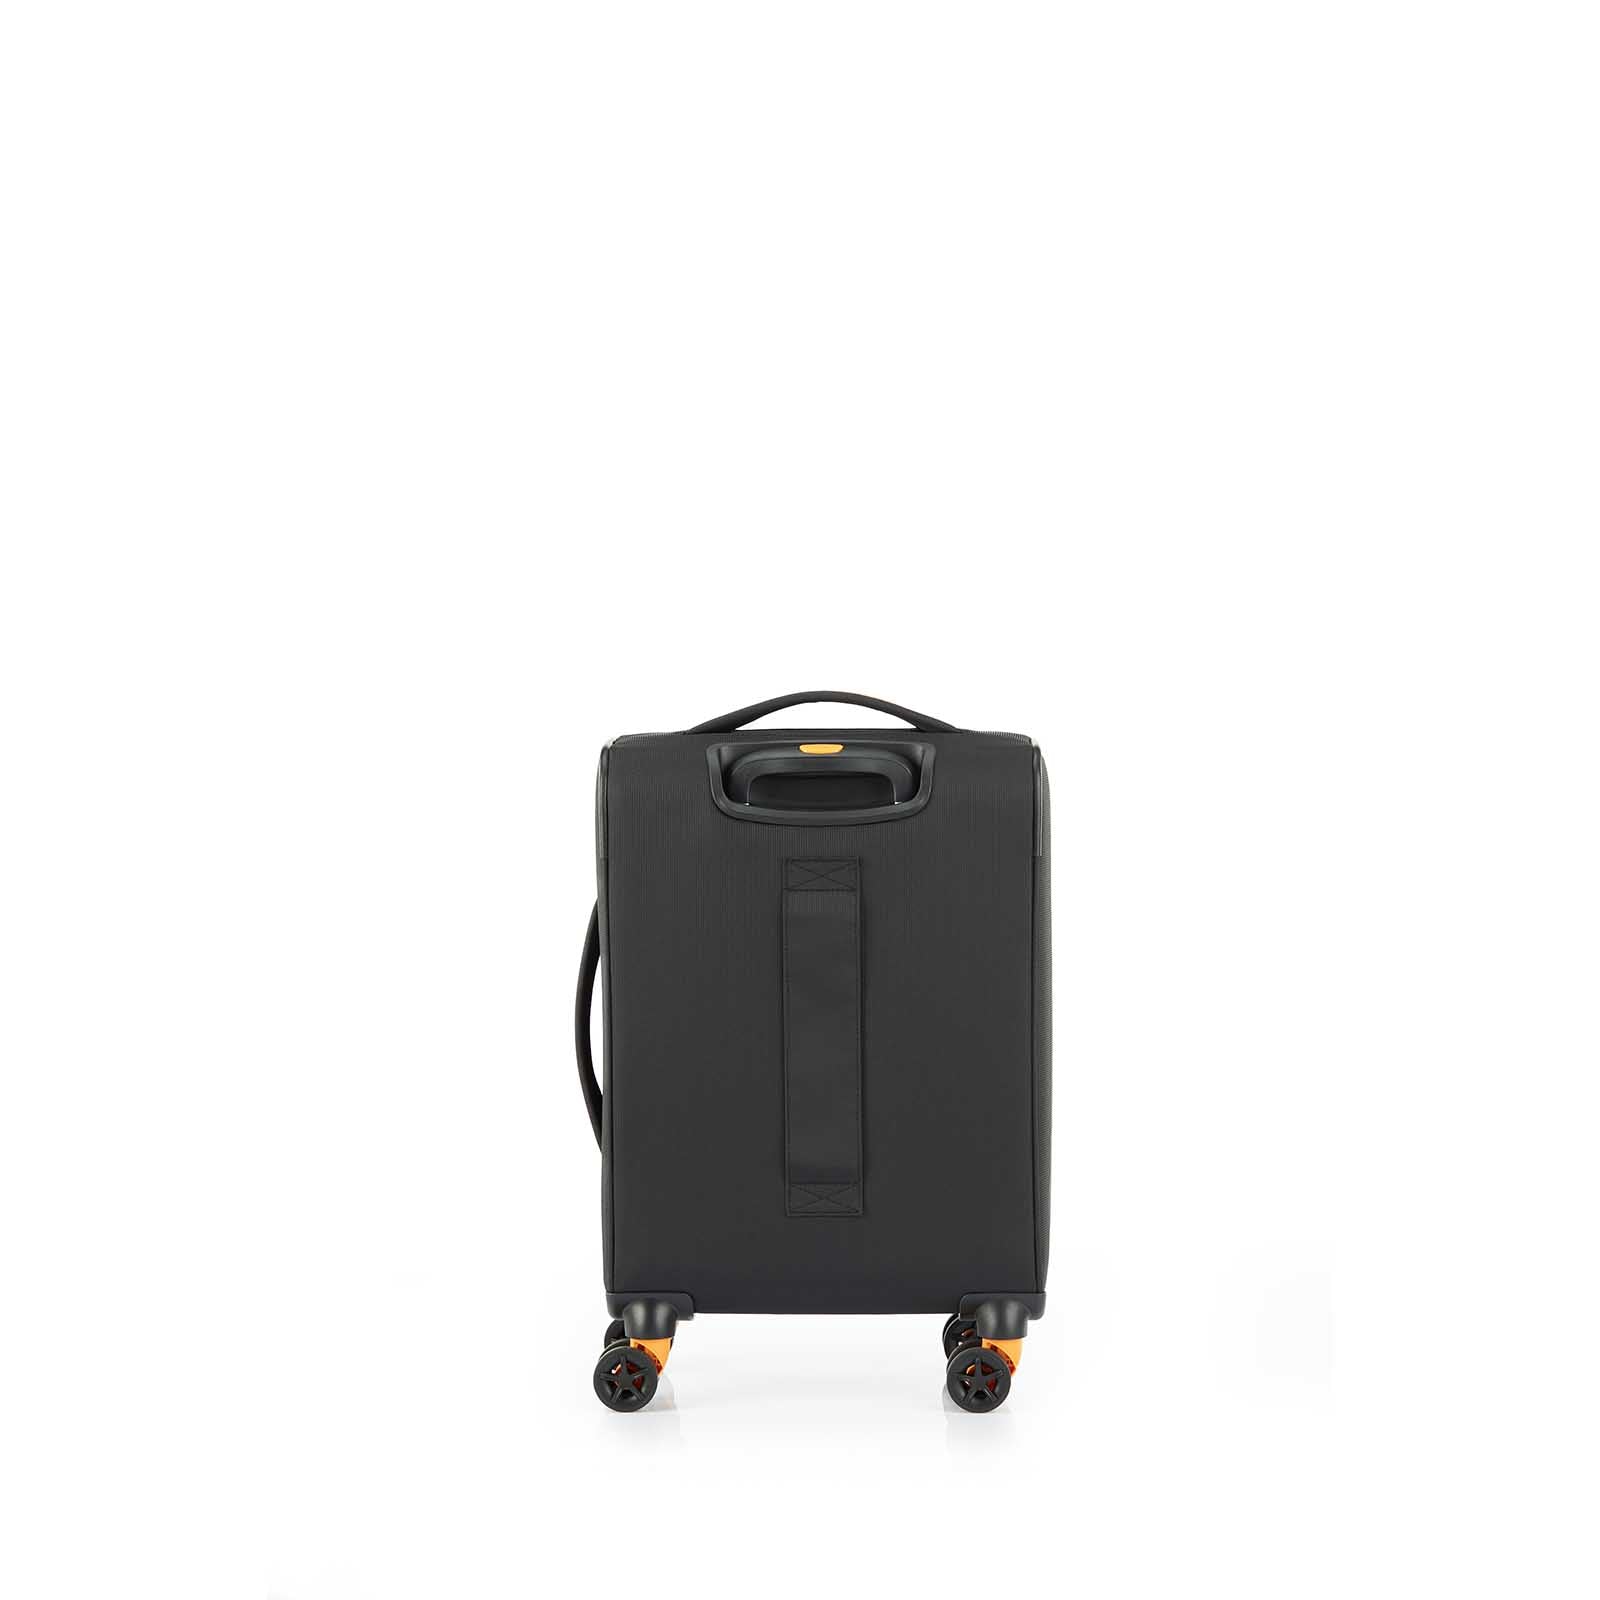 American-Tourister-Applite-4-Eco-55cm-Carry-On-Suitcase-Black-Mustard-Back